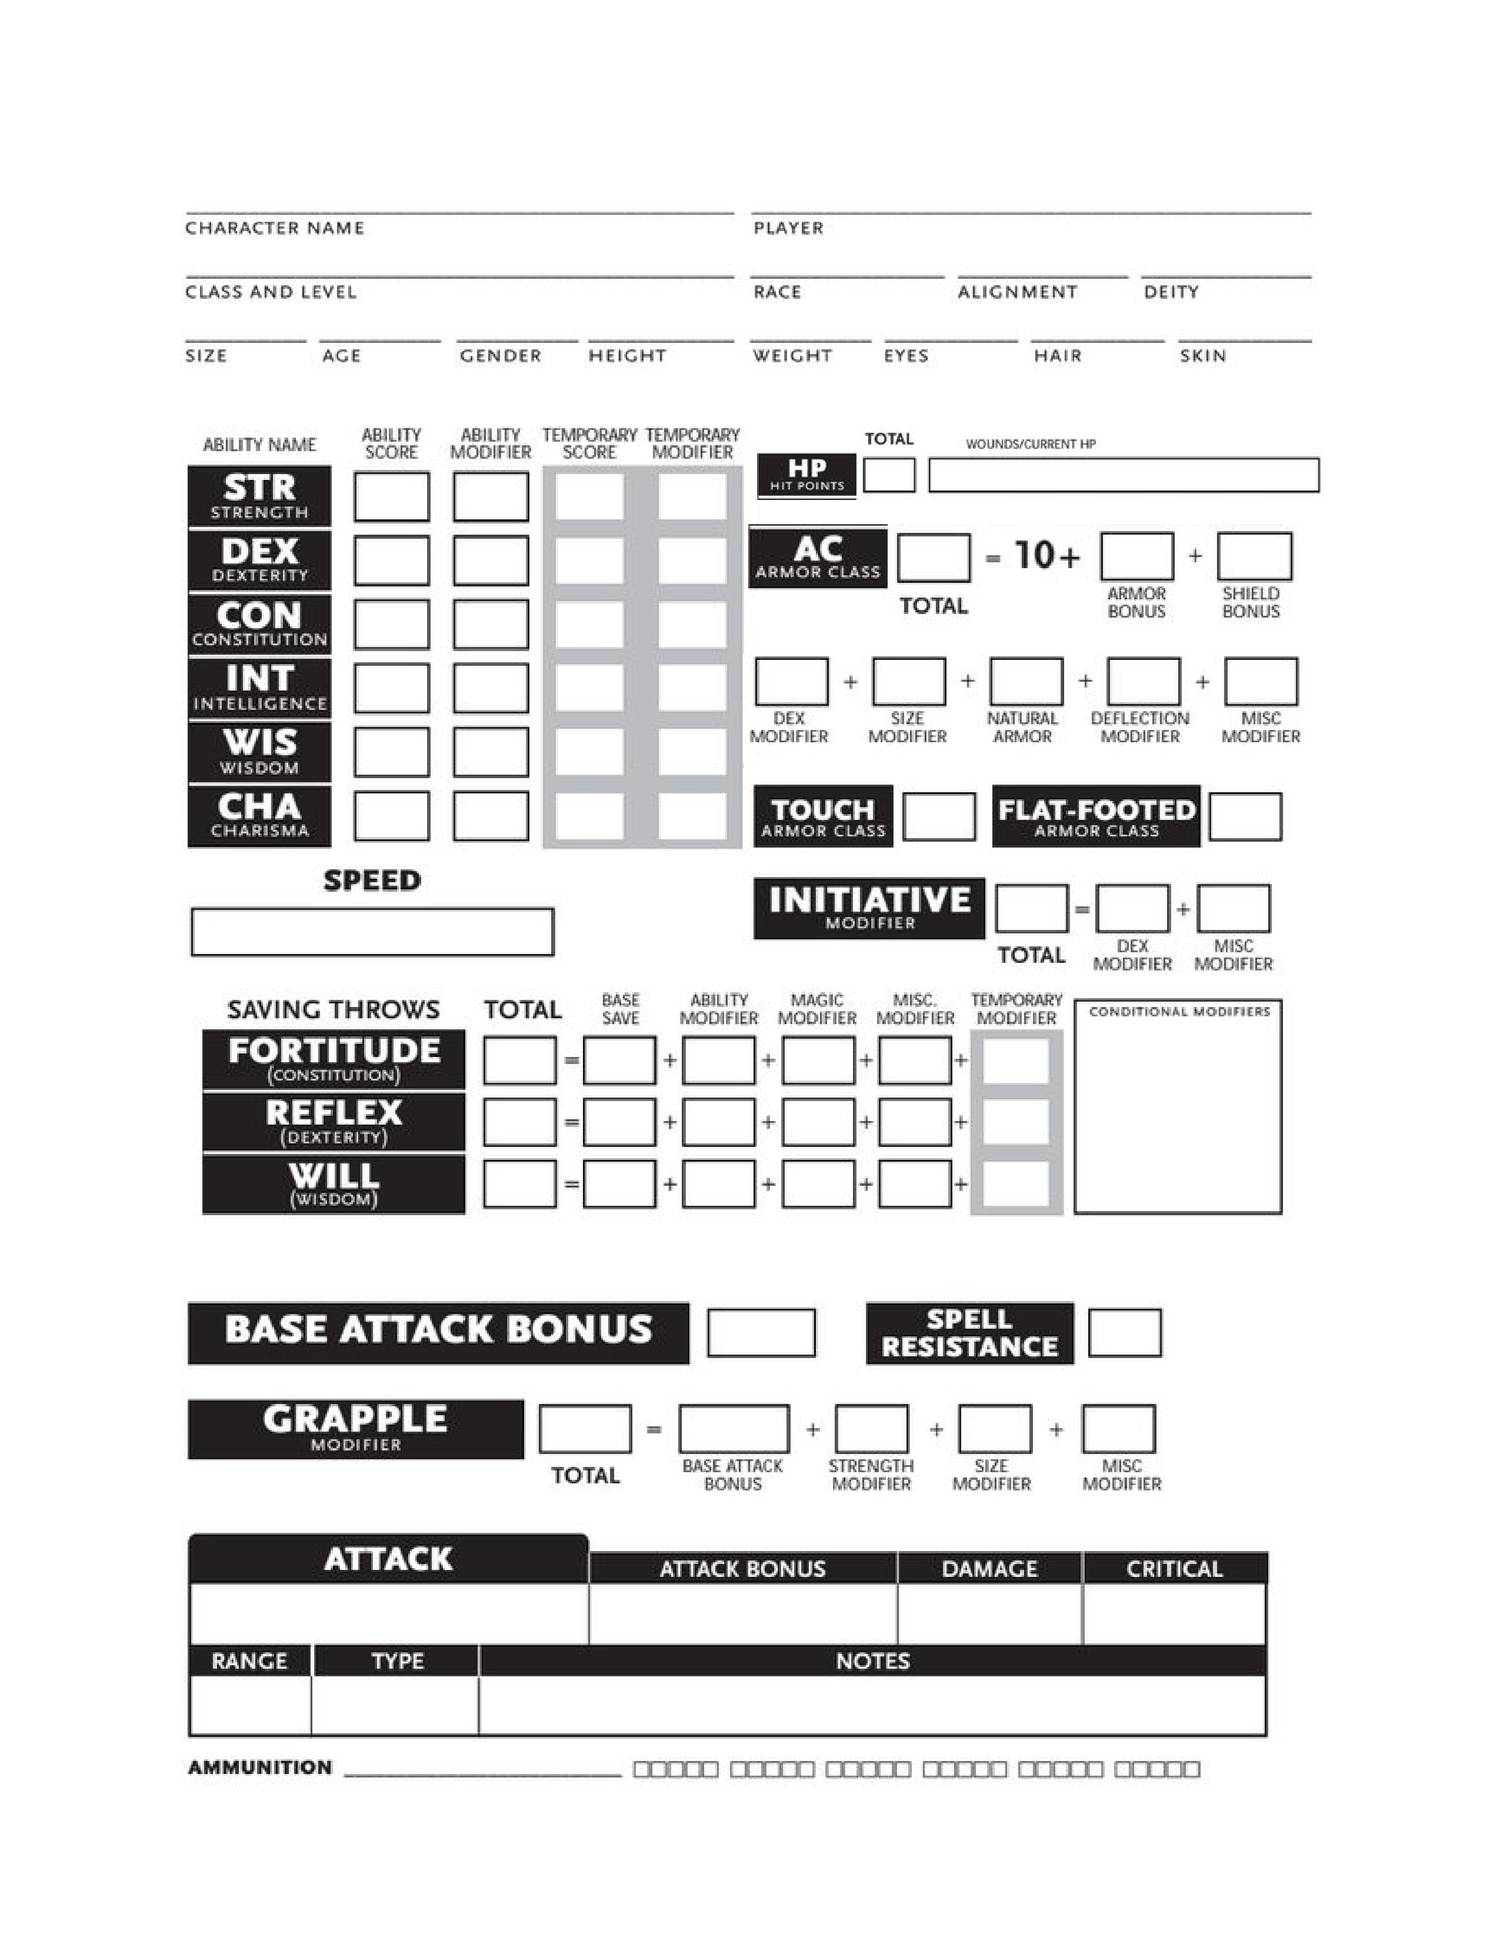 Deluxe Character Sheets 3 5 Answerlasopa